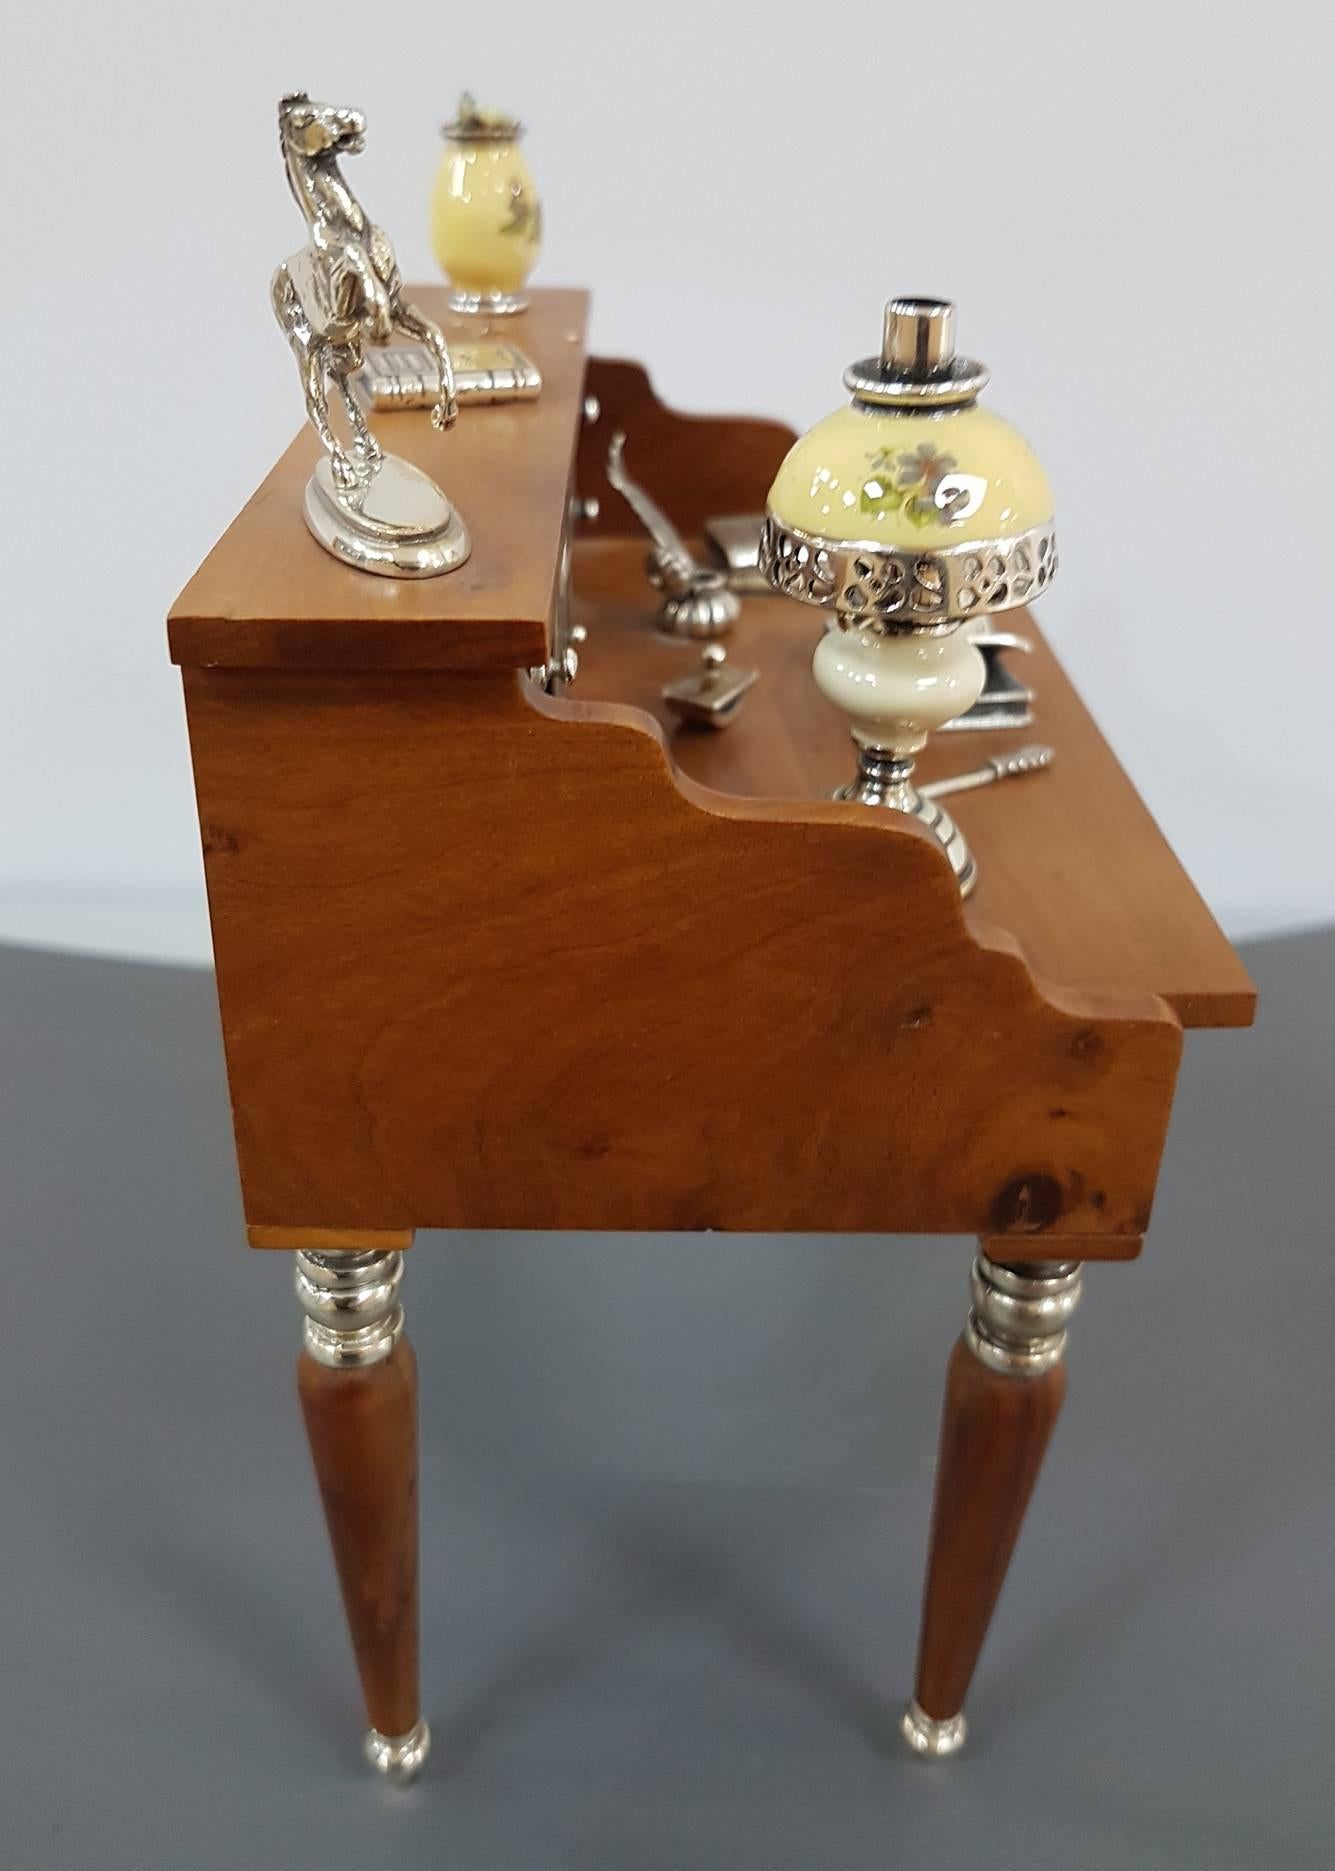 Miniature of antique writing desk made entirely by hand in briar with details in sterling silver.
The desk drawers are all open able and the details of the lamp and the vase is in enamelled sterling silver.